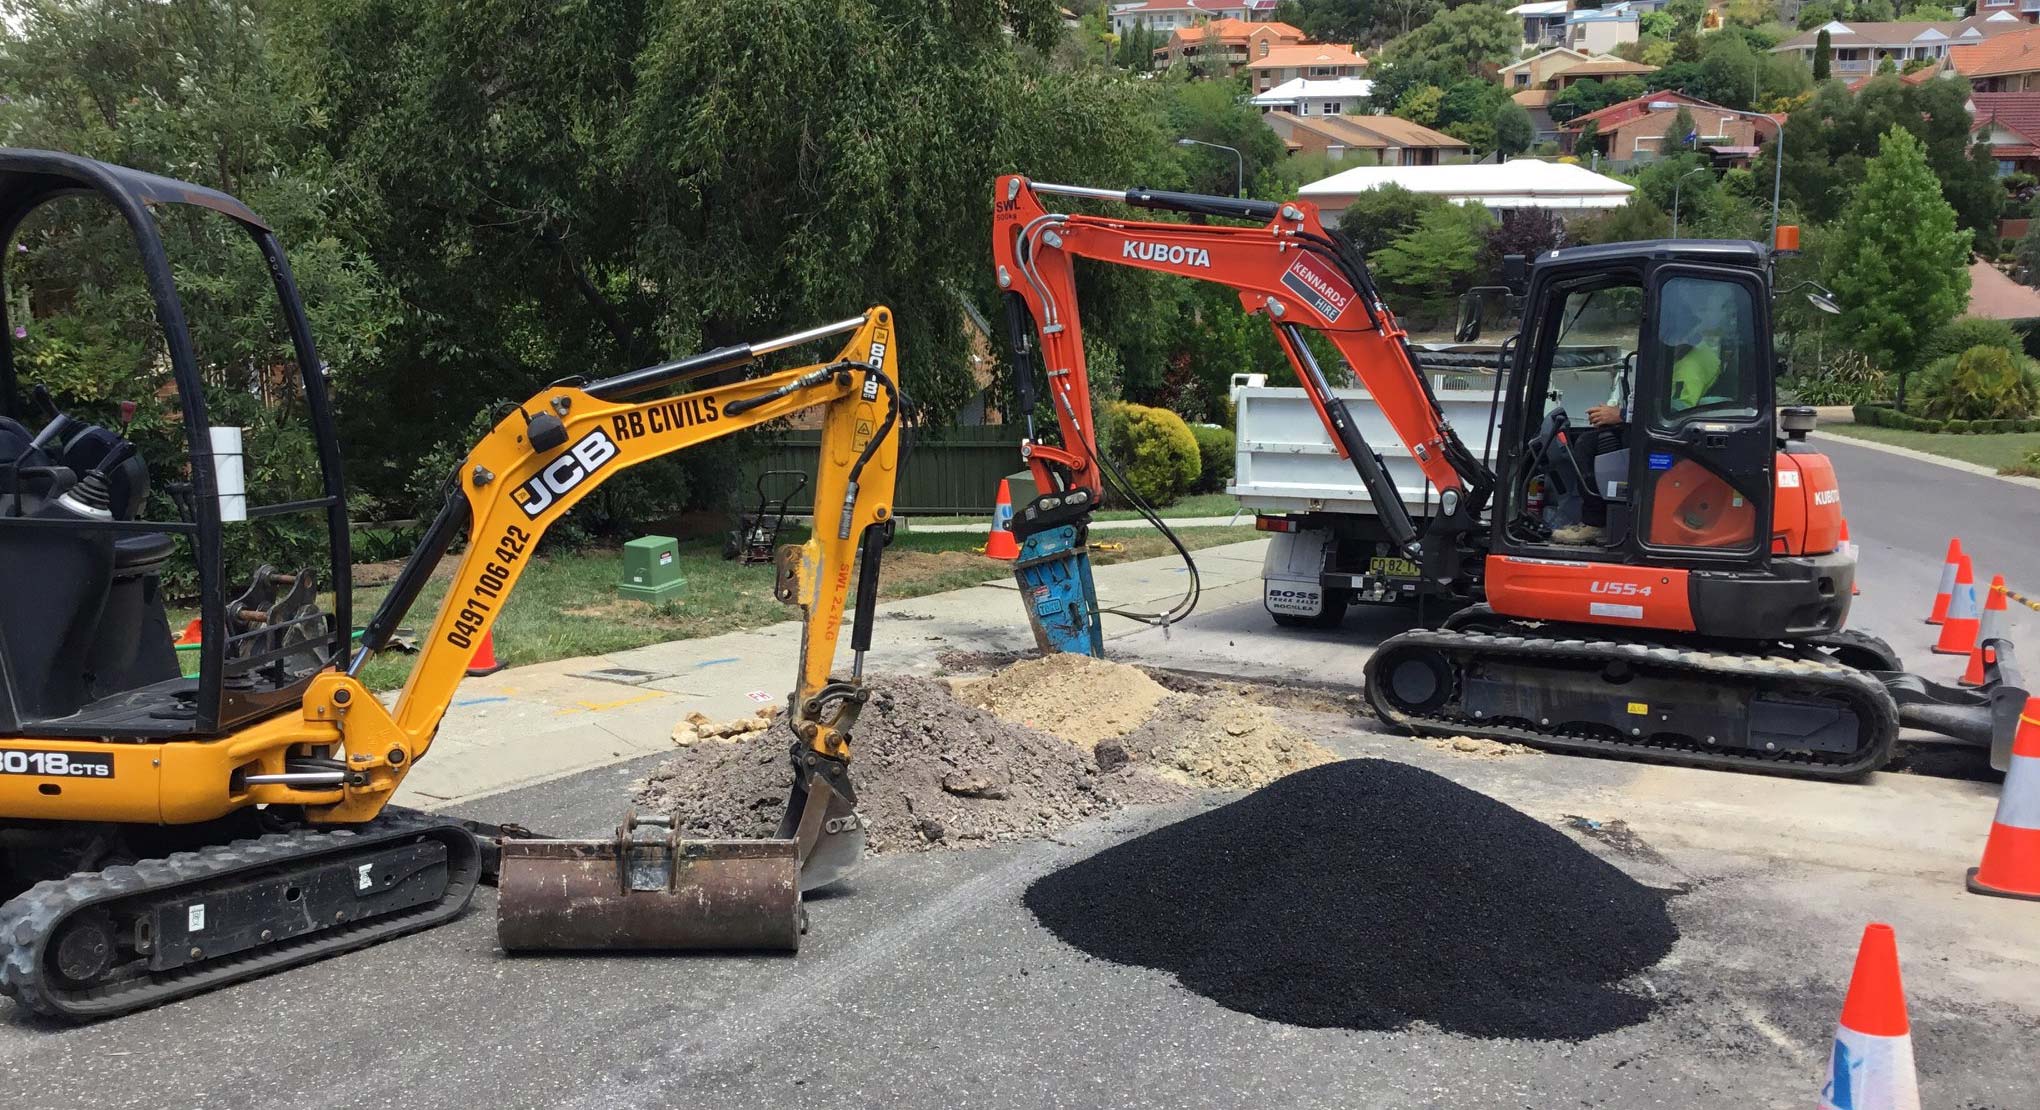 5-Axis Excavations performing Excavation for road crossing near Wollongong